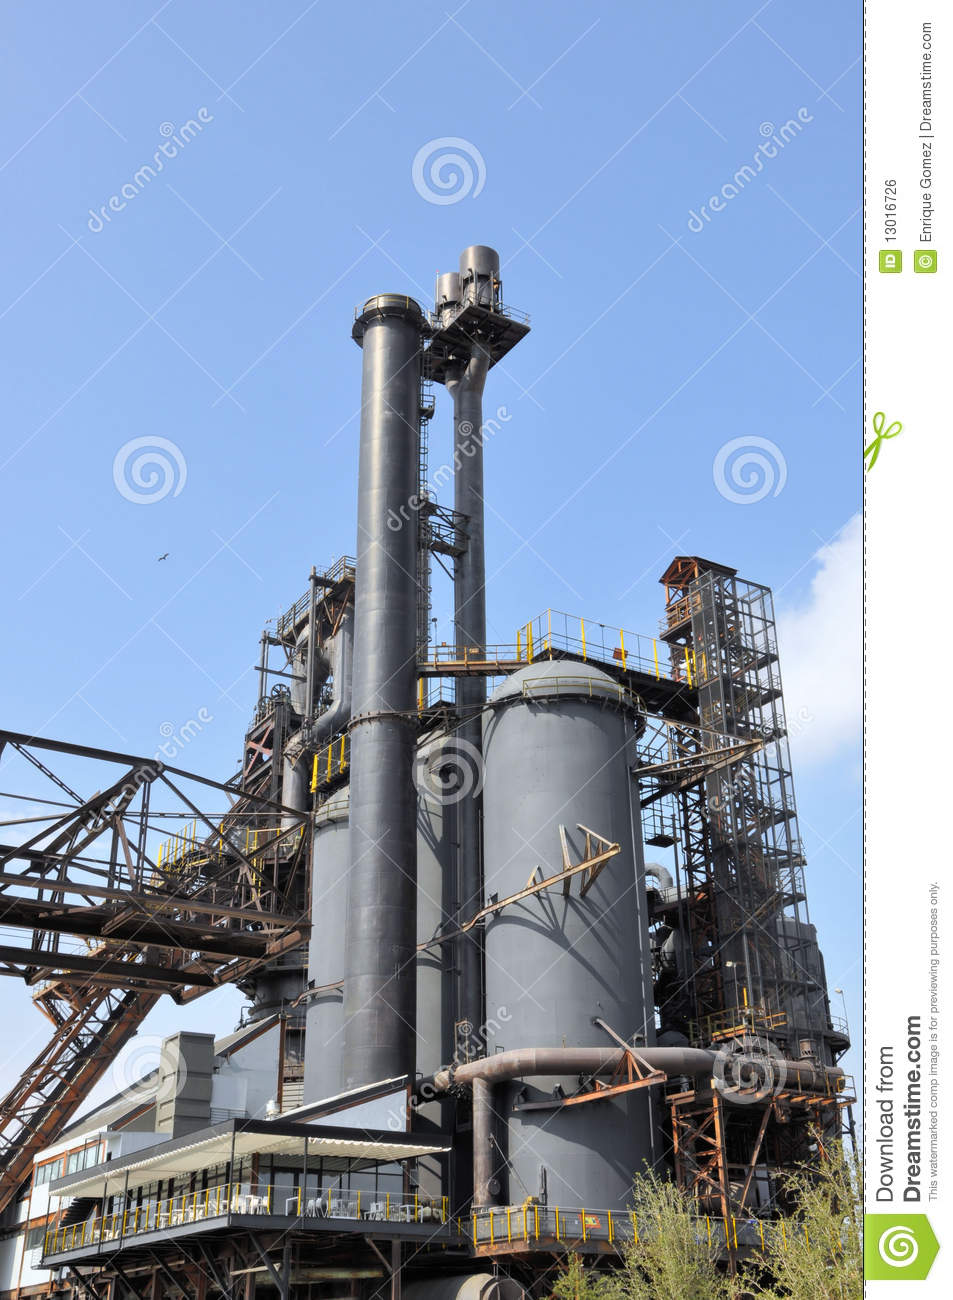 Steel Mill Royalty Free Stock Image   Image  13016726